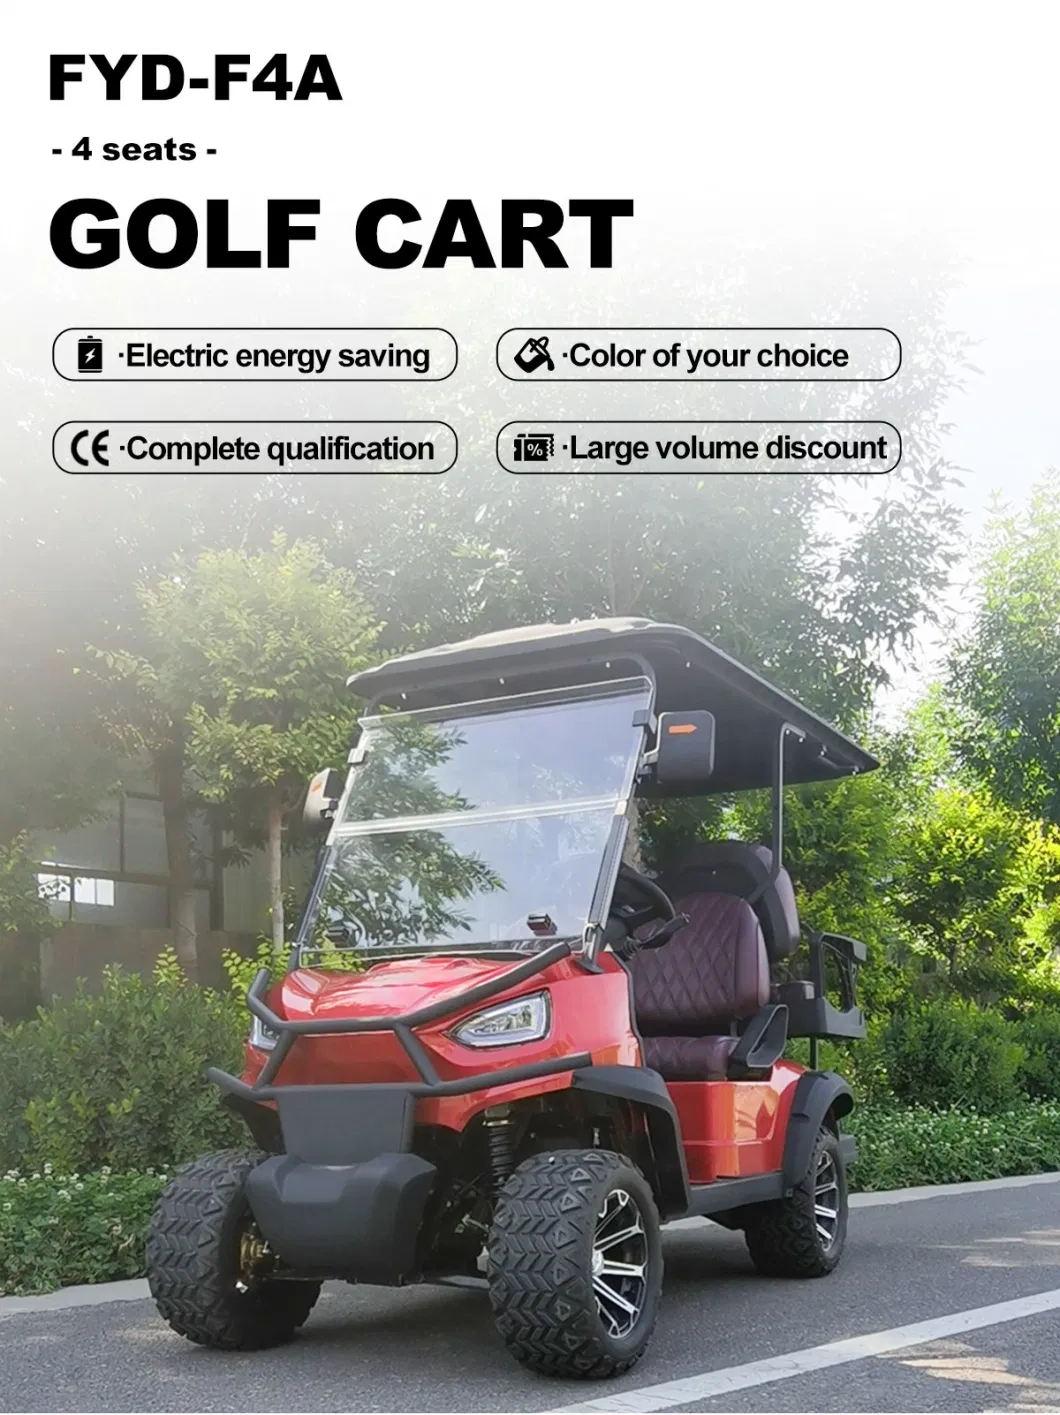 Wholesale Golf Cart Electric Utility Vehicle Classic Bus Hunting Zone off-Road Gulf Buggies 4 Passengers 2 Seaters Red Electric Golf Buggy Luxury